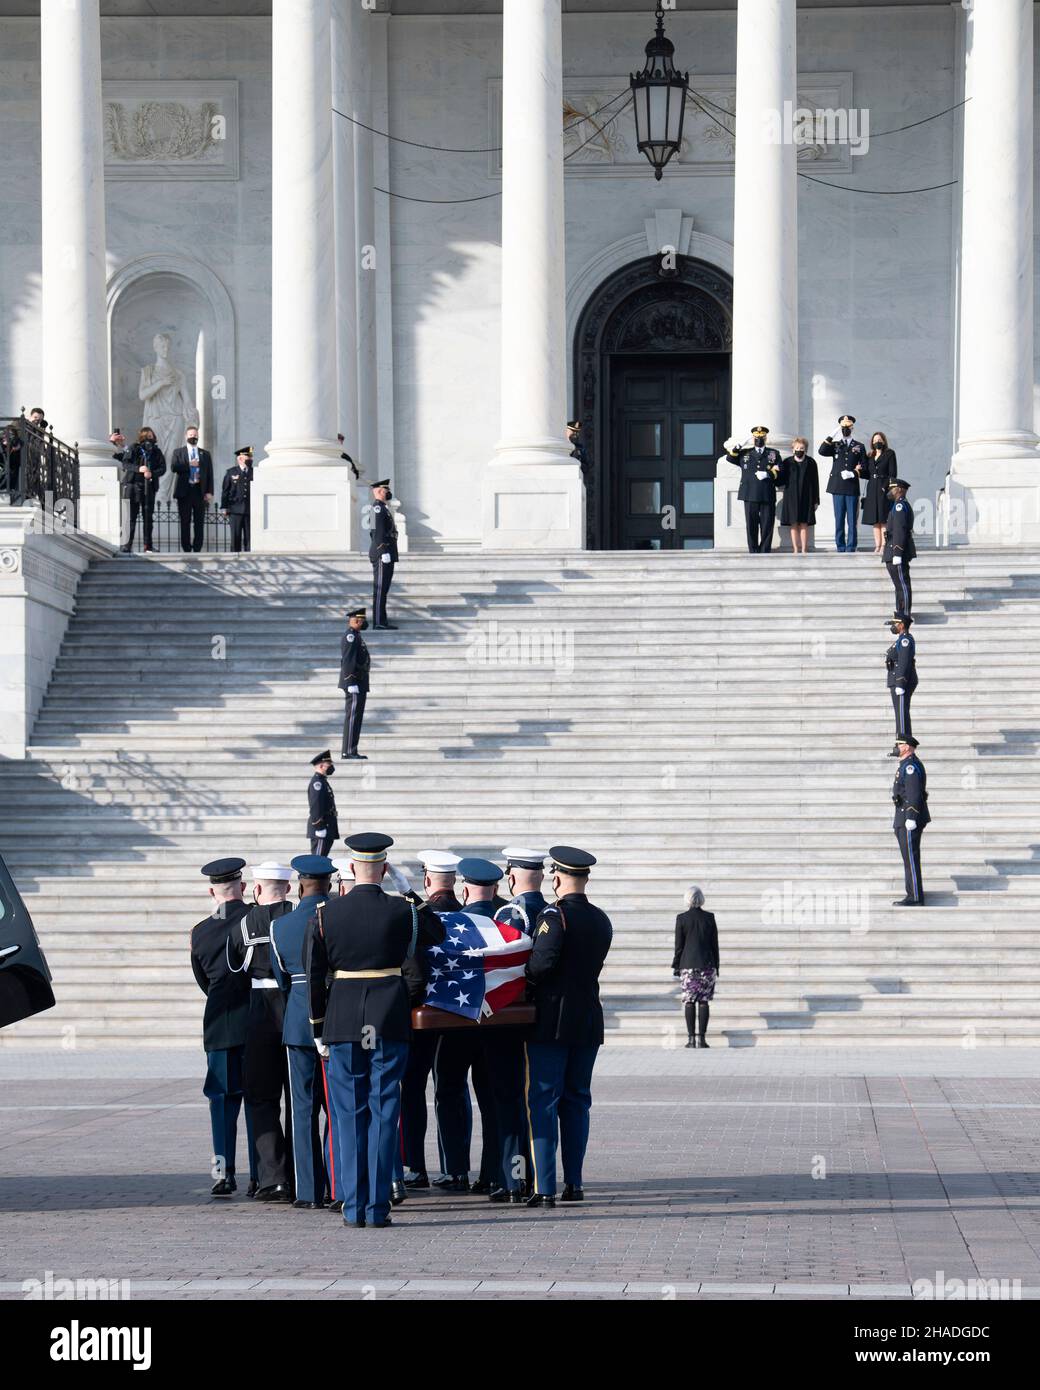 Washington, United States of America. 09 December, 2021. U.S. Armed Forces honor guard carry the flag-draped casket of World War II veteran and former Senator Robert Dole up the steps of the U.S. Capitol where it will lay in state,  December 9, 2021 in Washington, D.C. Senator Dole died at age 98 following a lifetime of service to the nation.  Credit: Sgt. Kevin Roy/U.S. Army/Alamy Live News Stock Photo